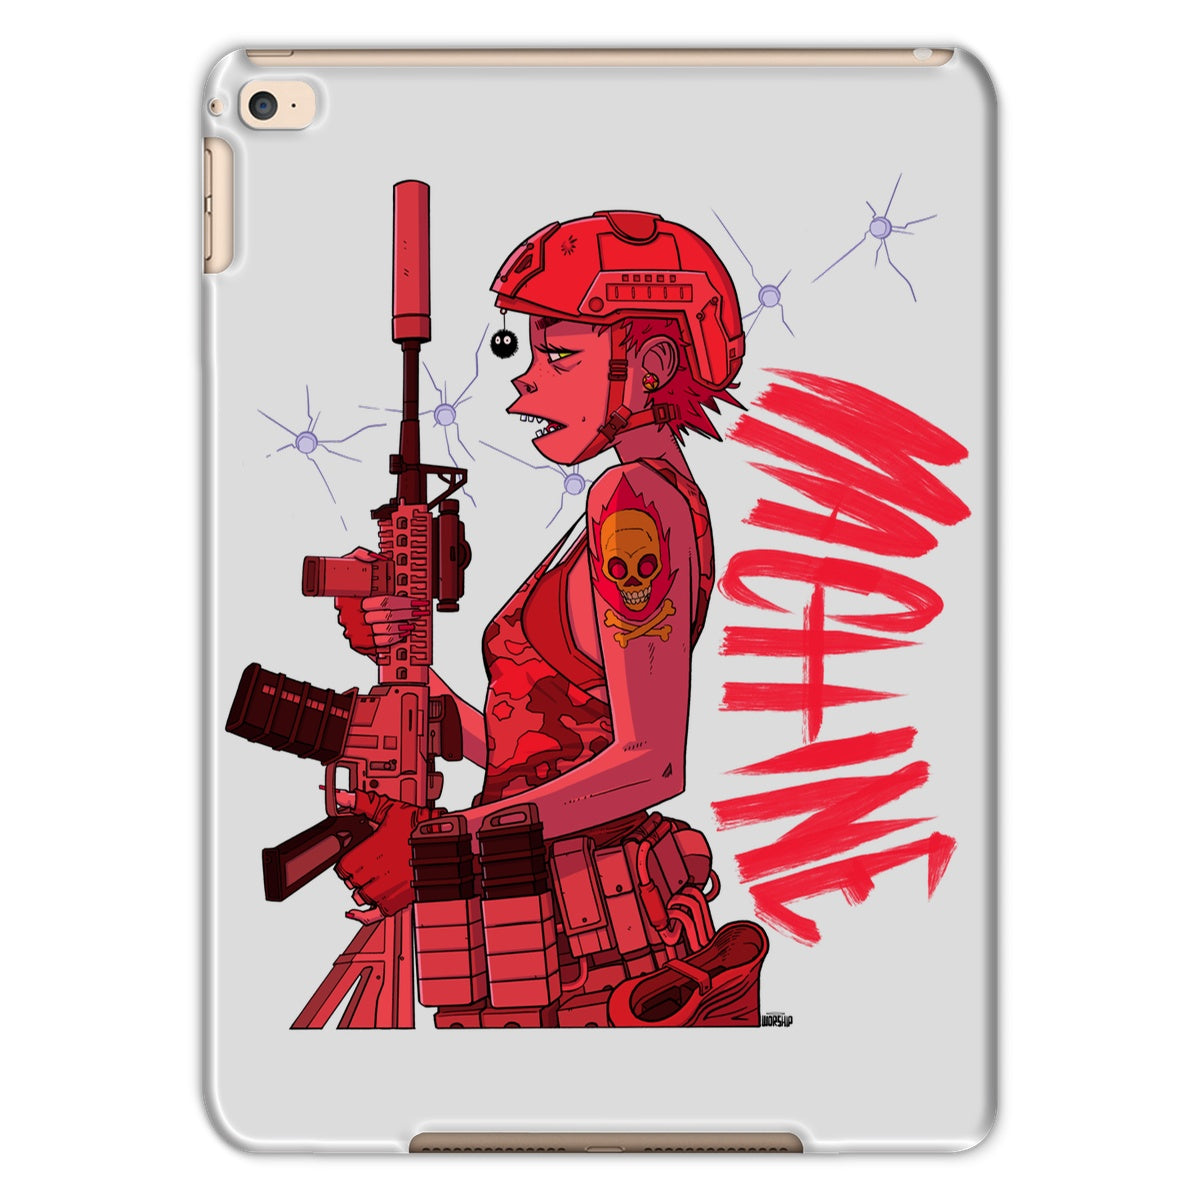 Unique and cool Gorillaz-style Tablet Case special forces illustration 